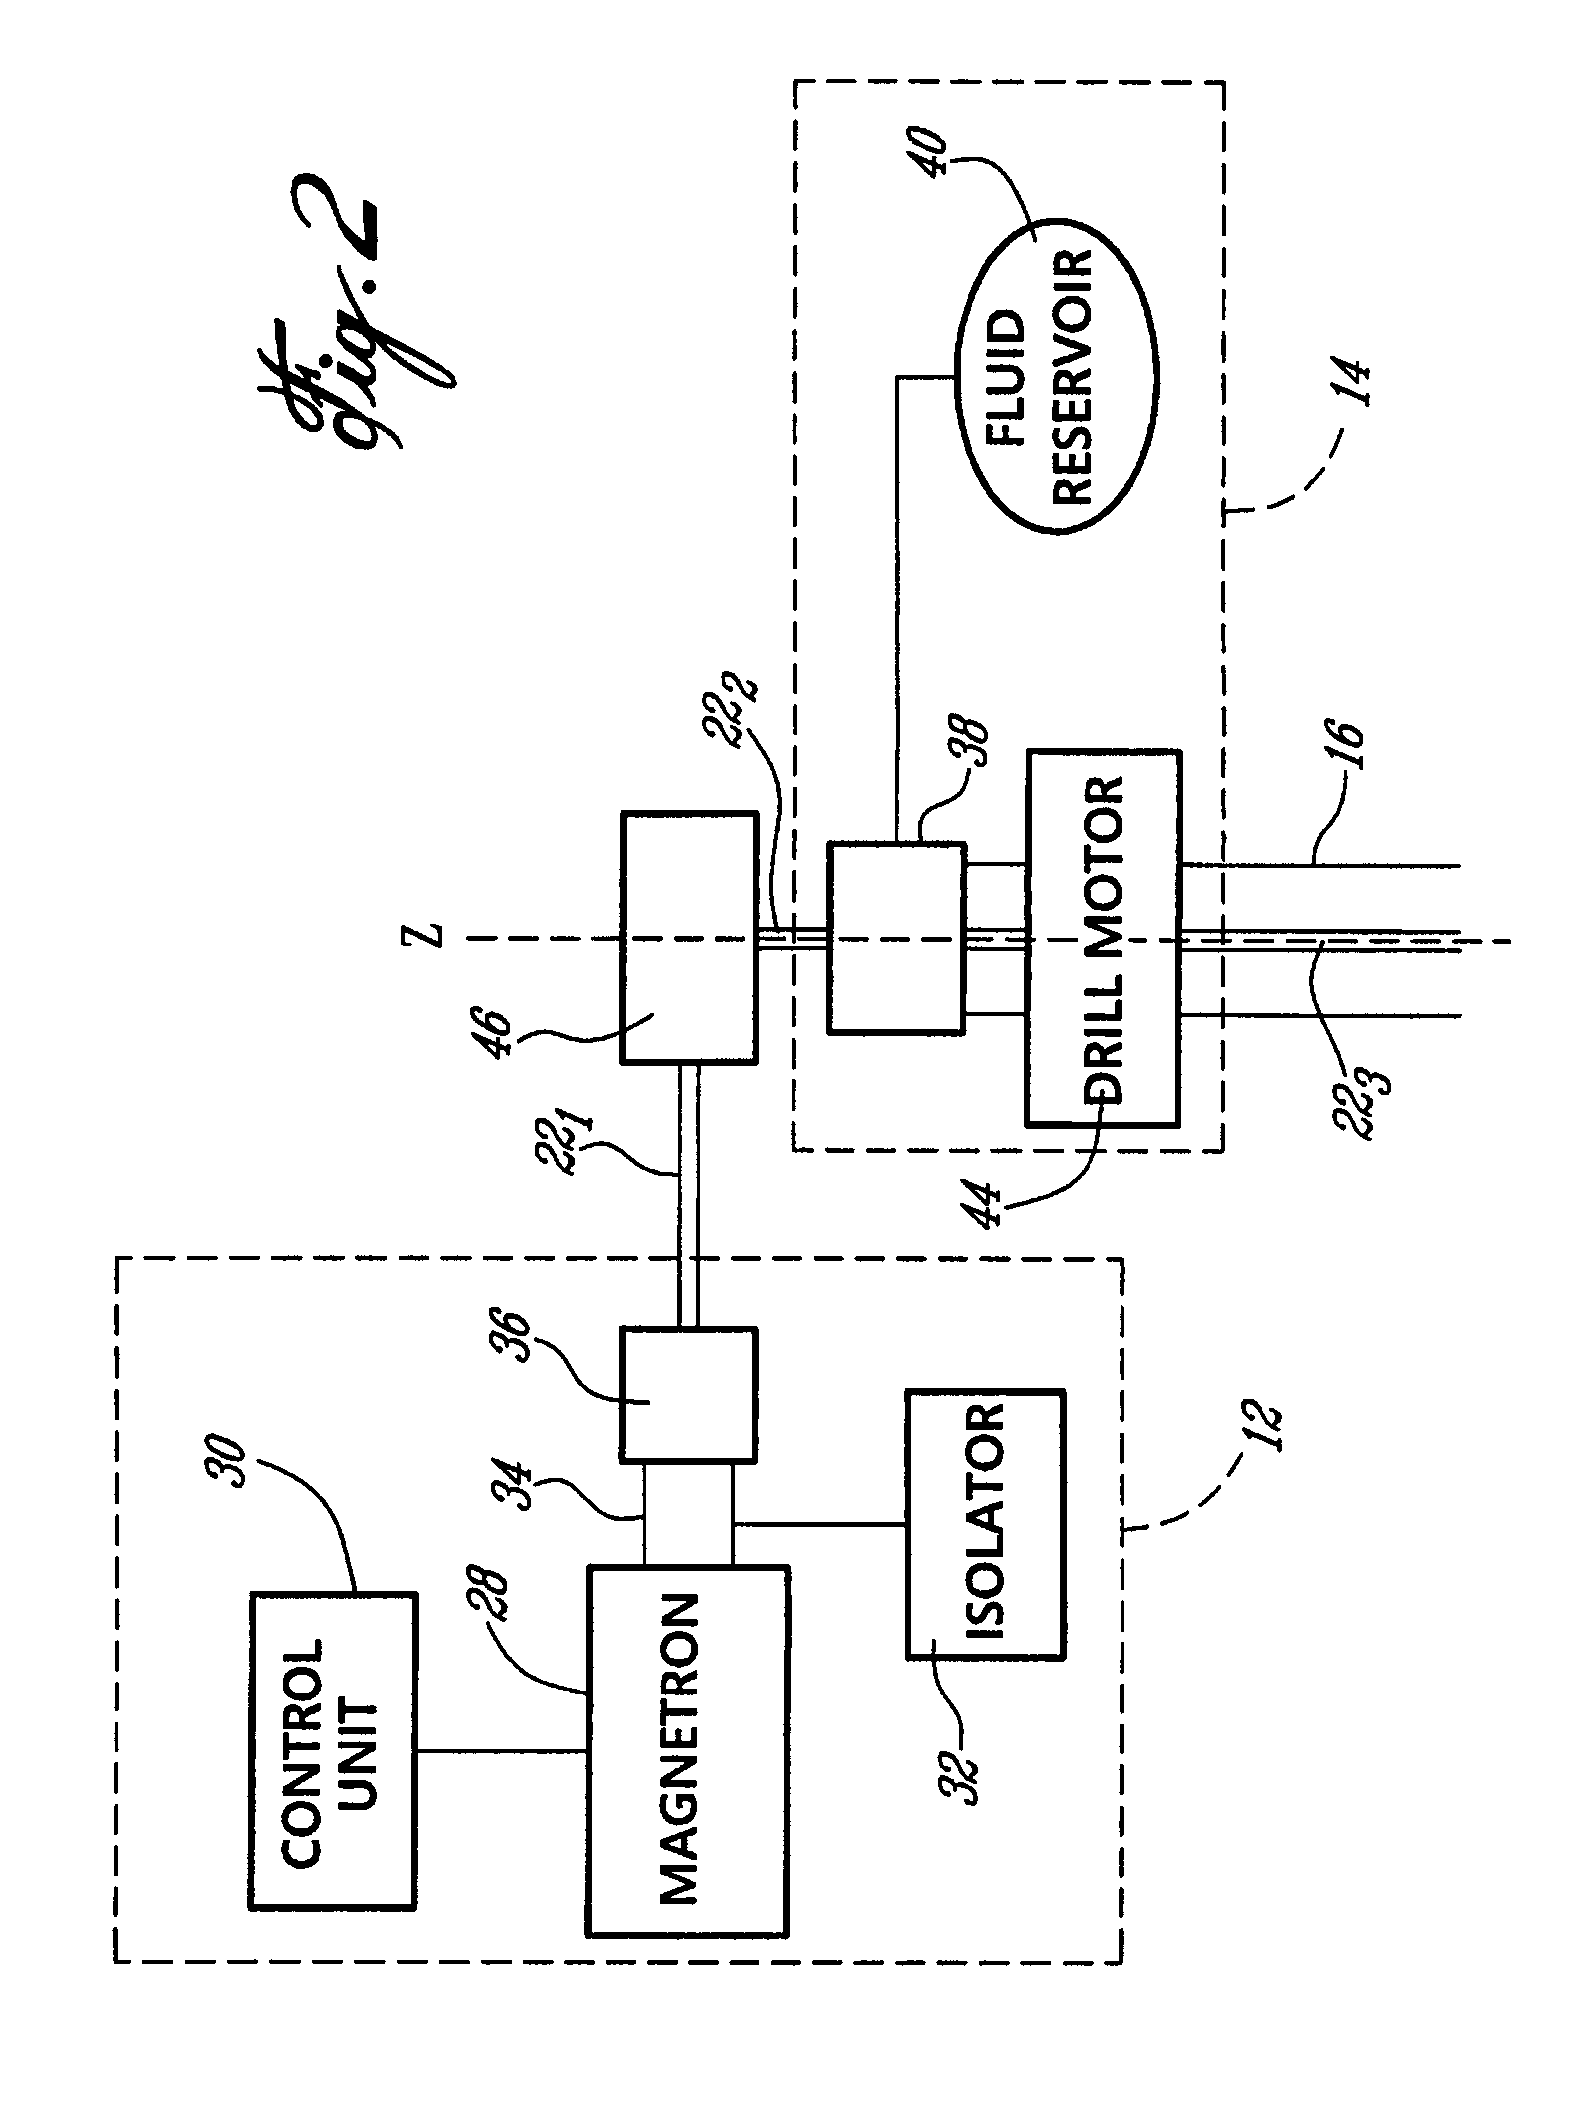 Electromagnetic energy assisted drilling system and method